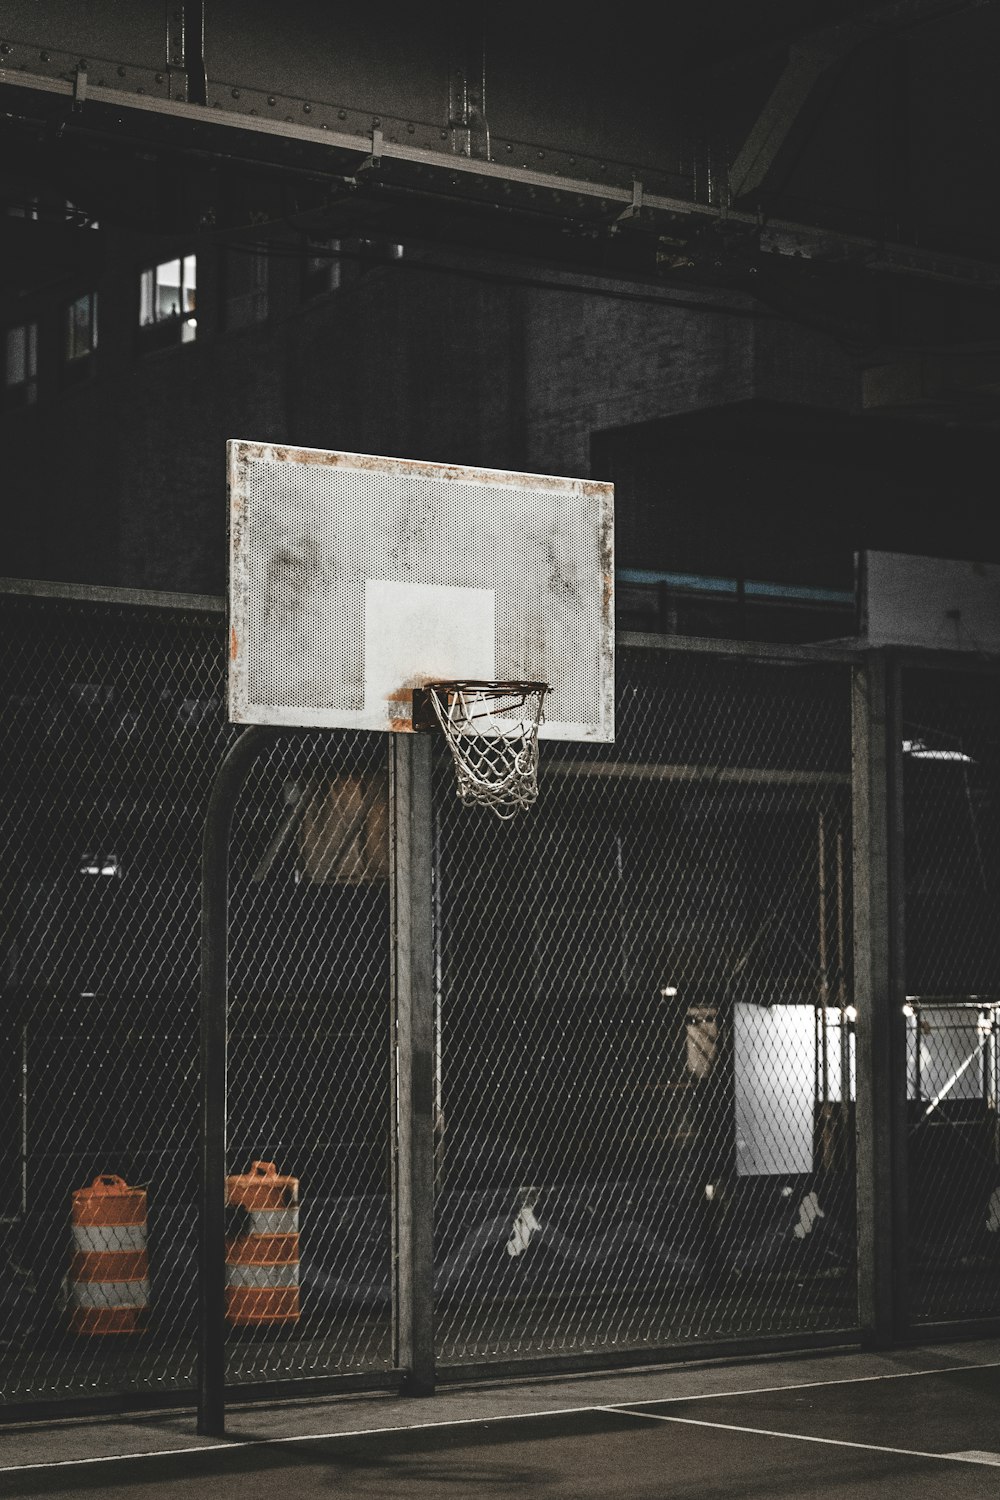 Street Basketball Pictures | Download Free Images on Unsplash